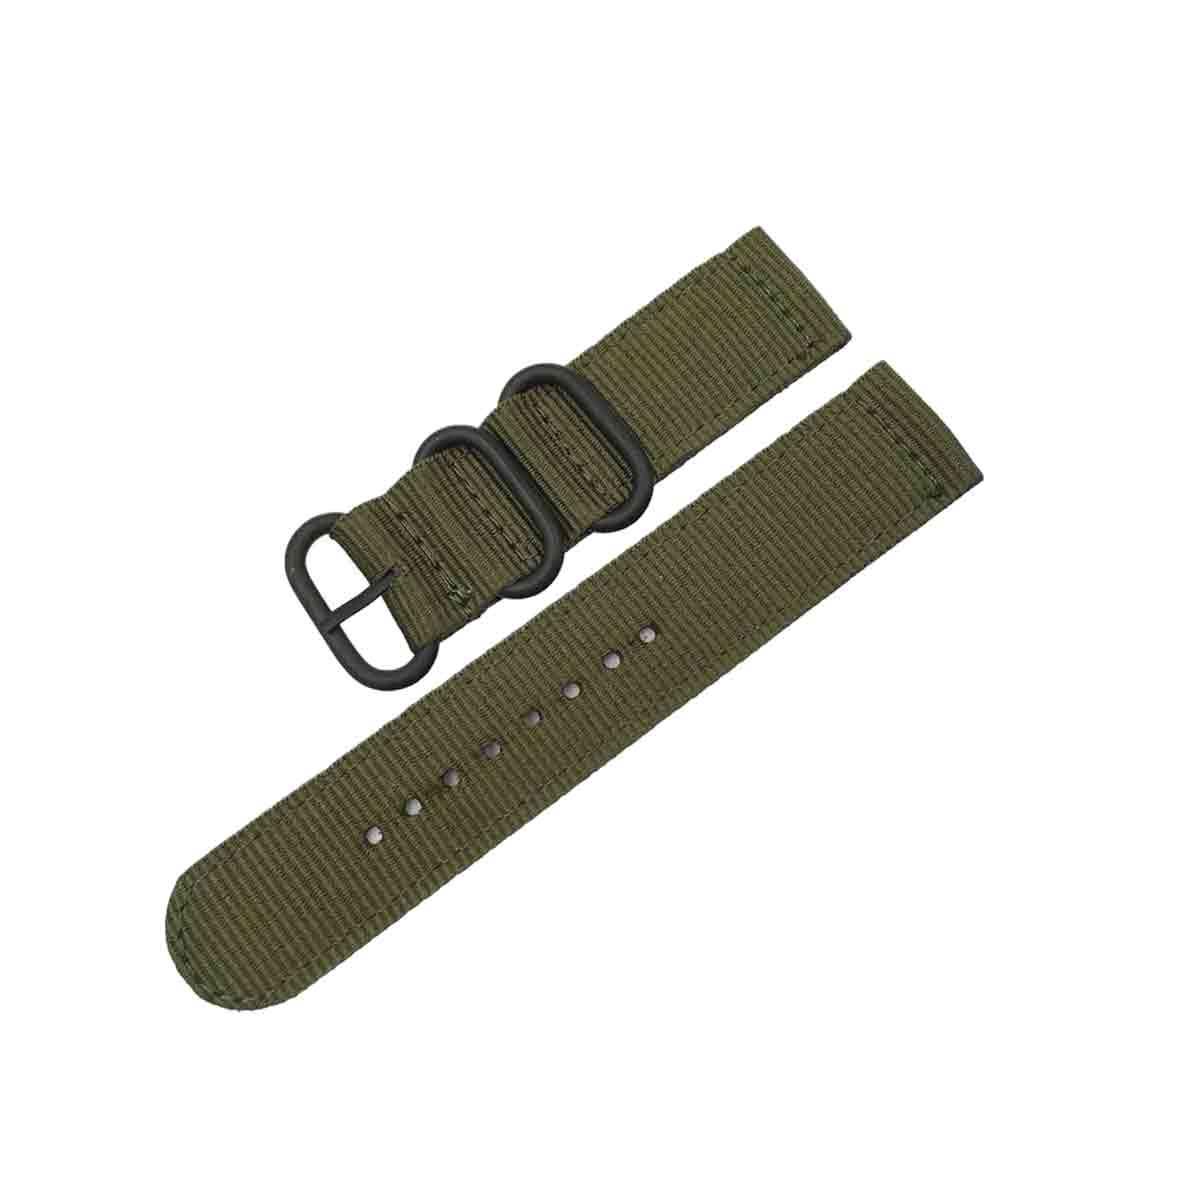 NATO Garmin Fenix 5S & 5S Plus Replacement Bands (20mm) Army Green  